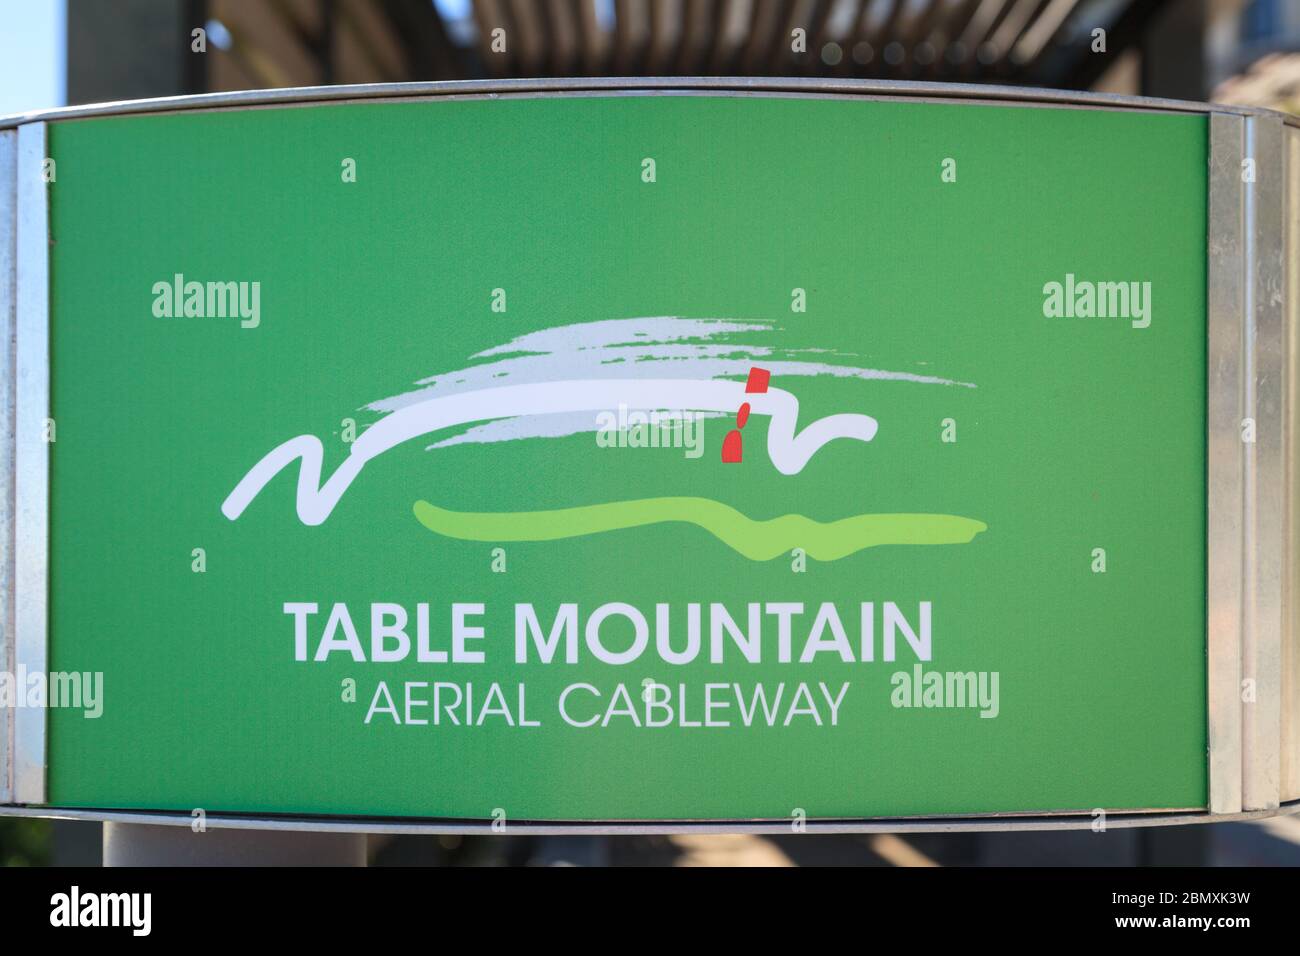 Table Mountain aerial cableway or cable car sign, Table Mountain National Park, Cape Town, South Africa Stock Photo